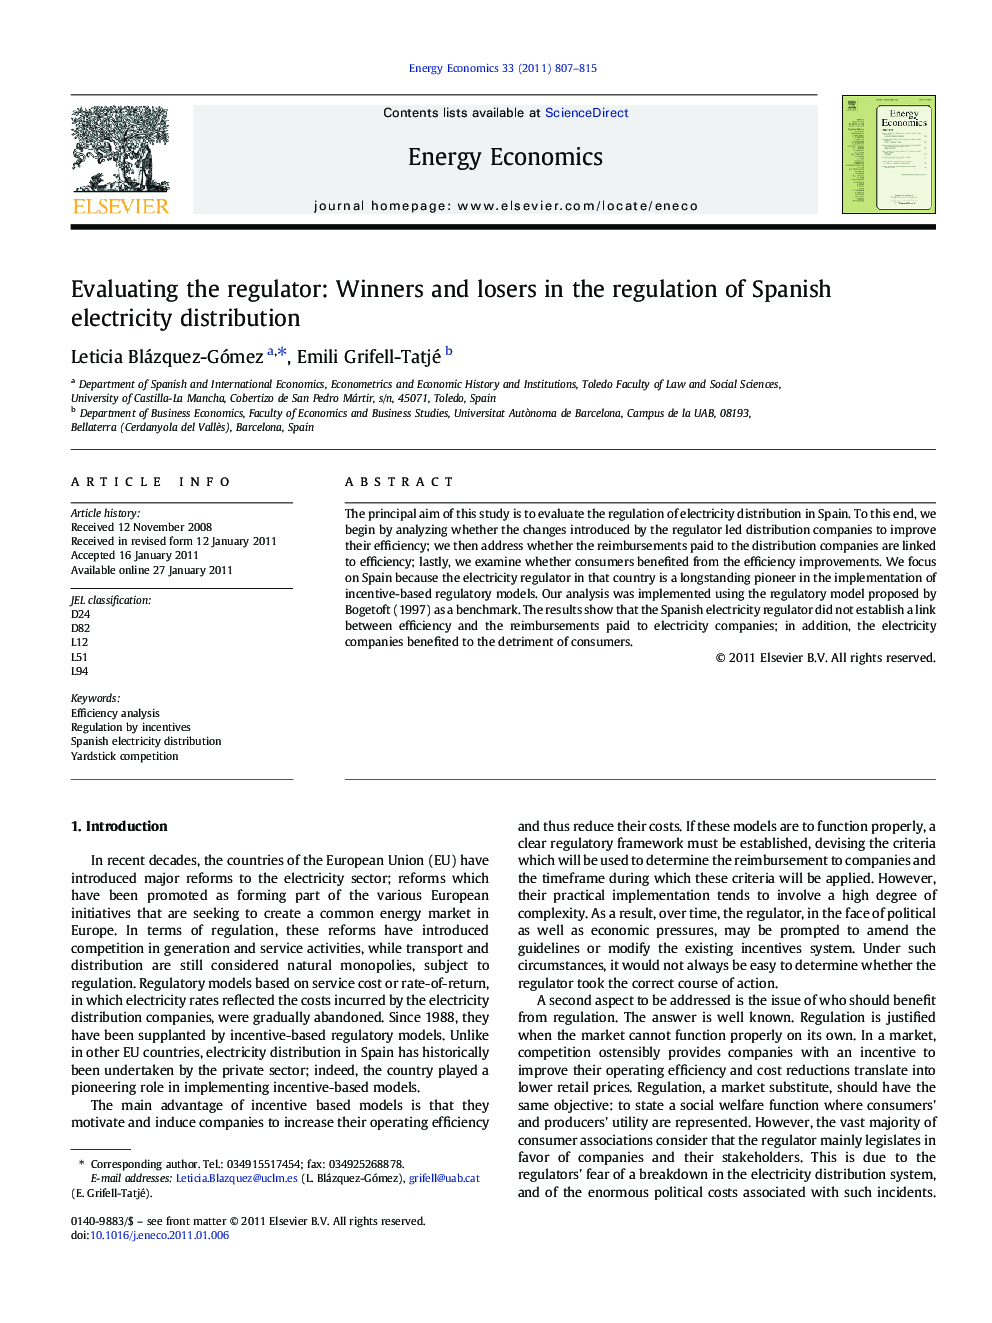 Evaluating the regulator: Winners and losers in the regulation of Spanish electricity distribution